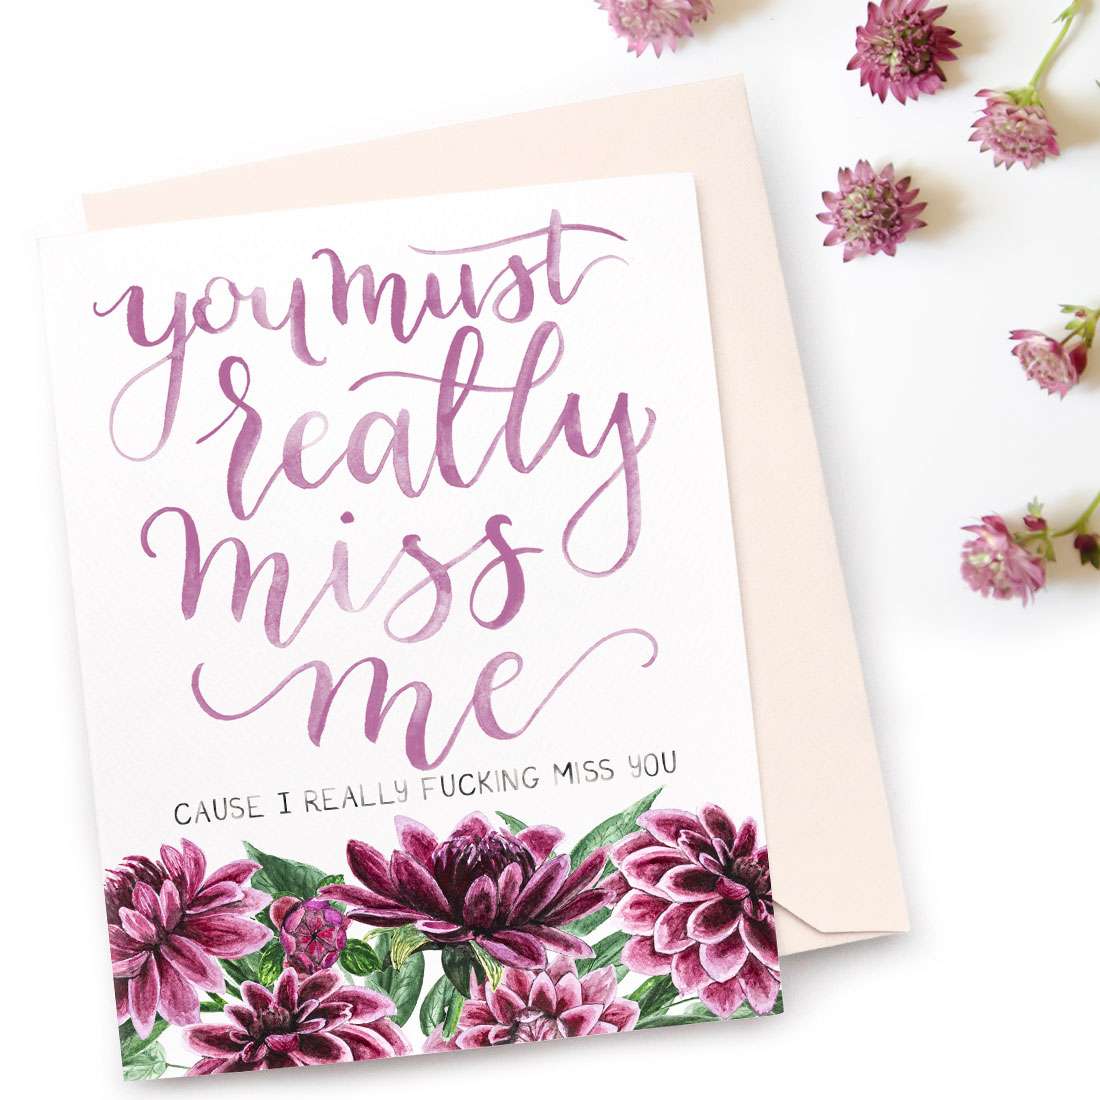 Image of a hand-lettered watercolor card saying "you must really miss me... cause I really fucking miss you" with purple dahlias by CharmCat | charmcat.net